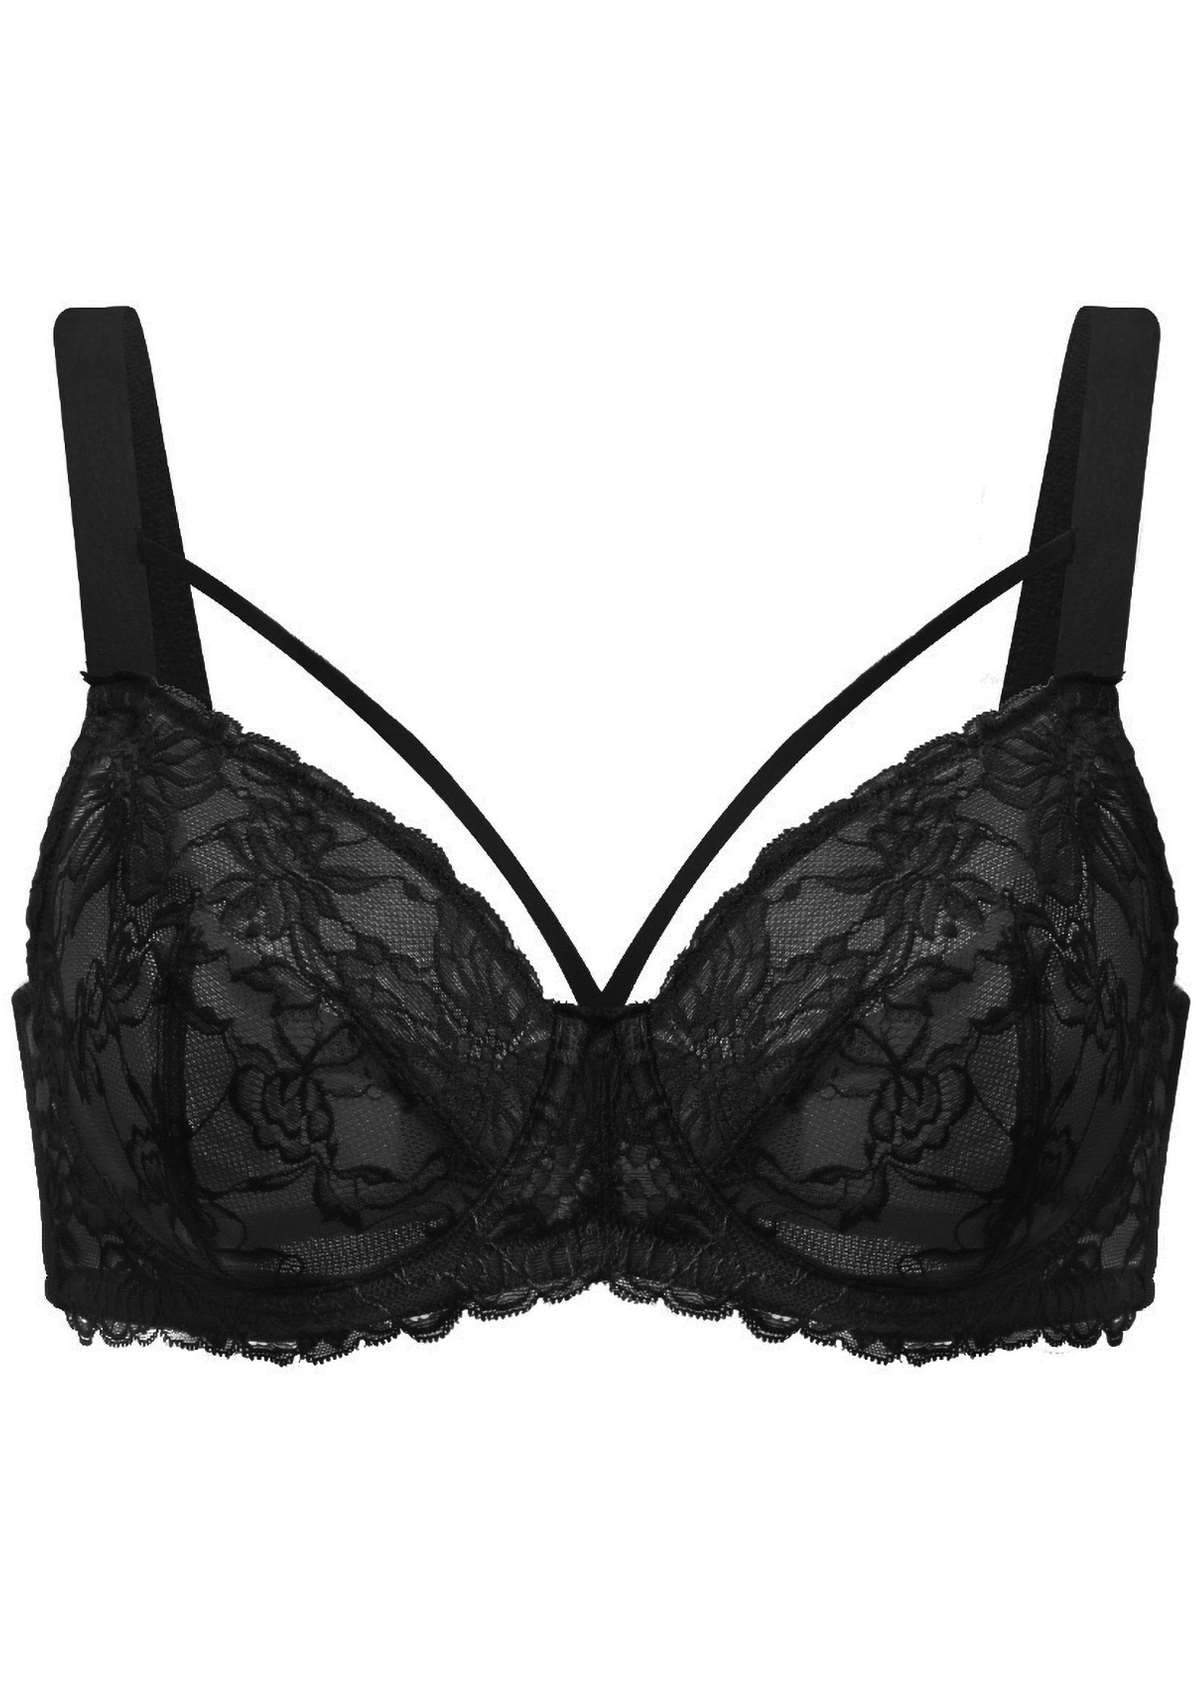 HSIA Pretty In Petals Bra - Plus Size Lingerie For Comfrot And Support - Black / 36 / H